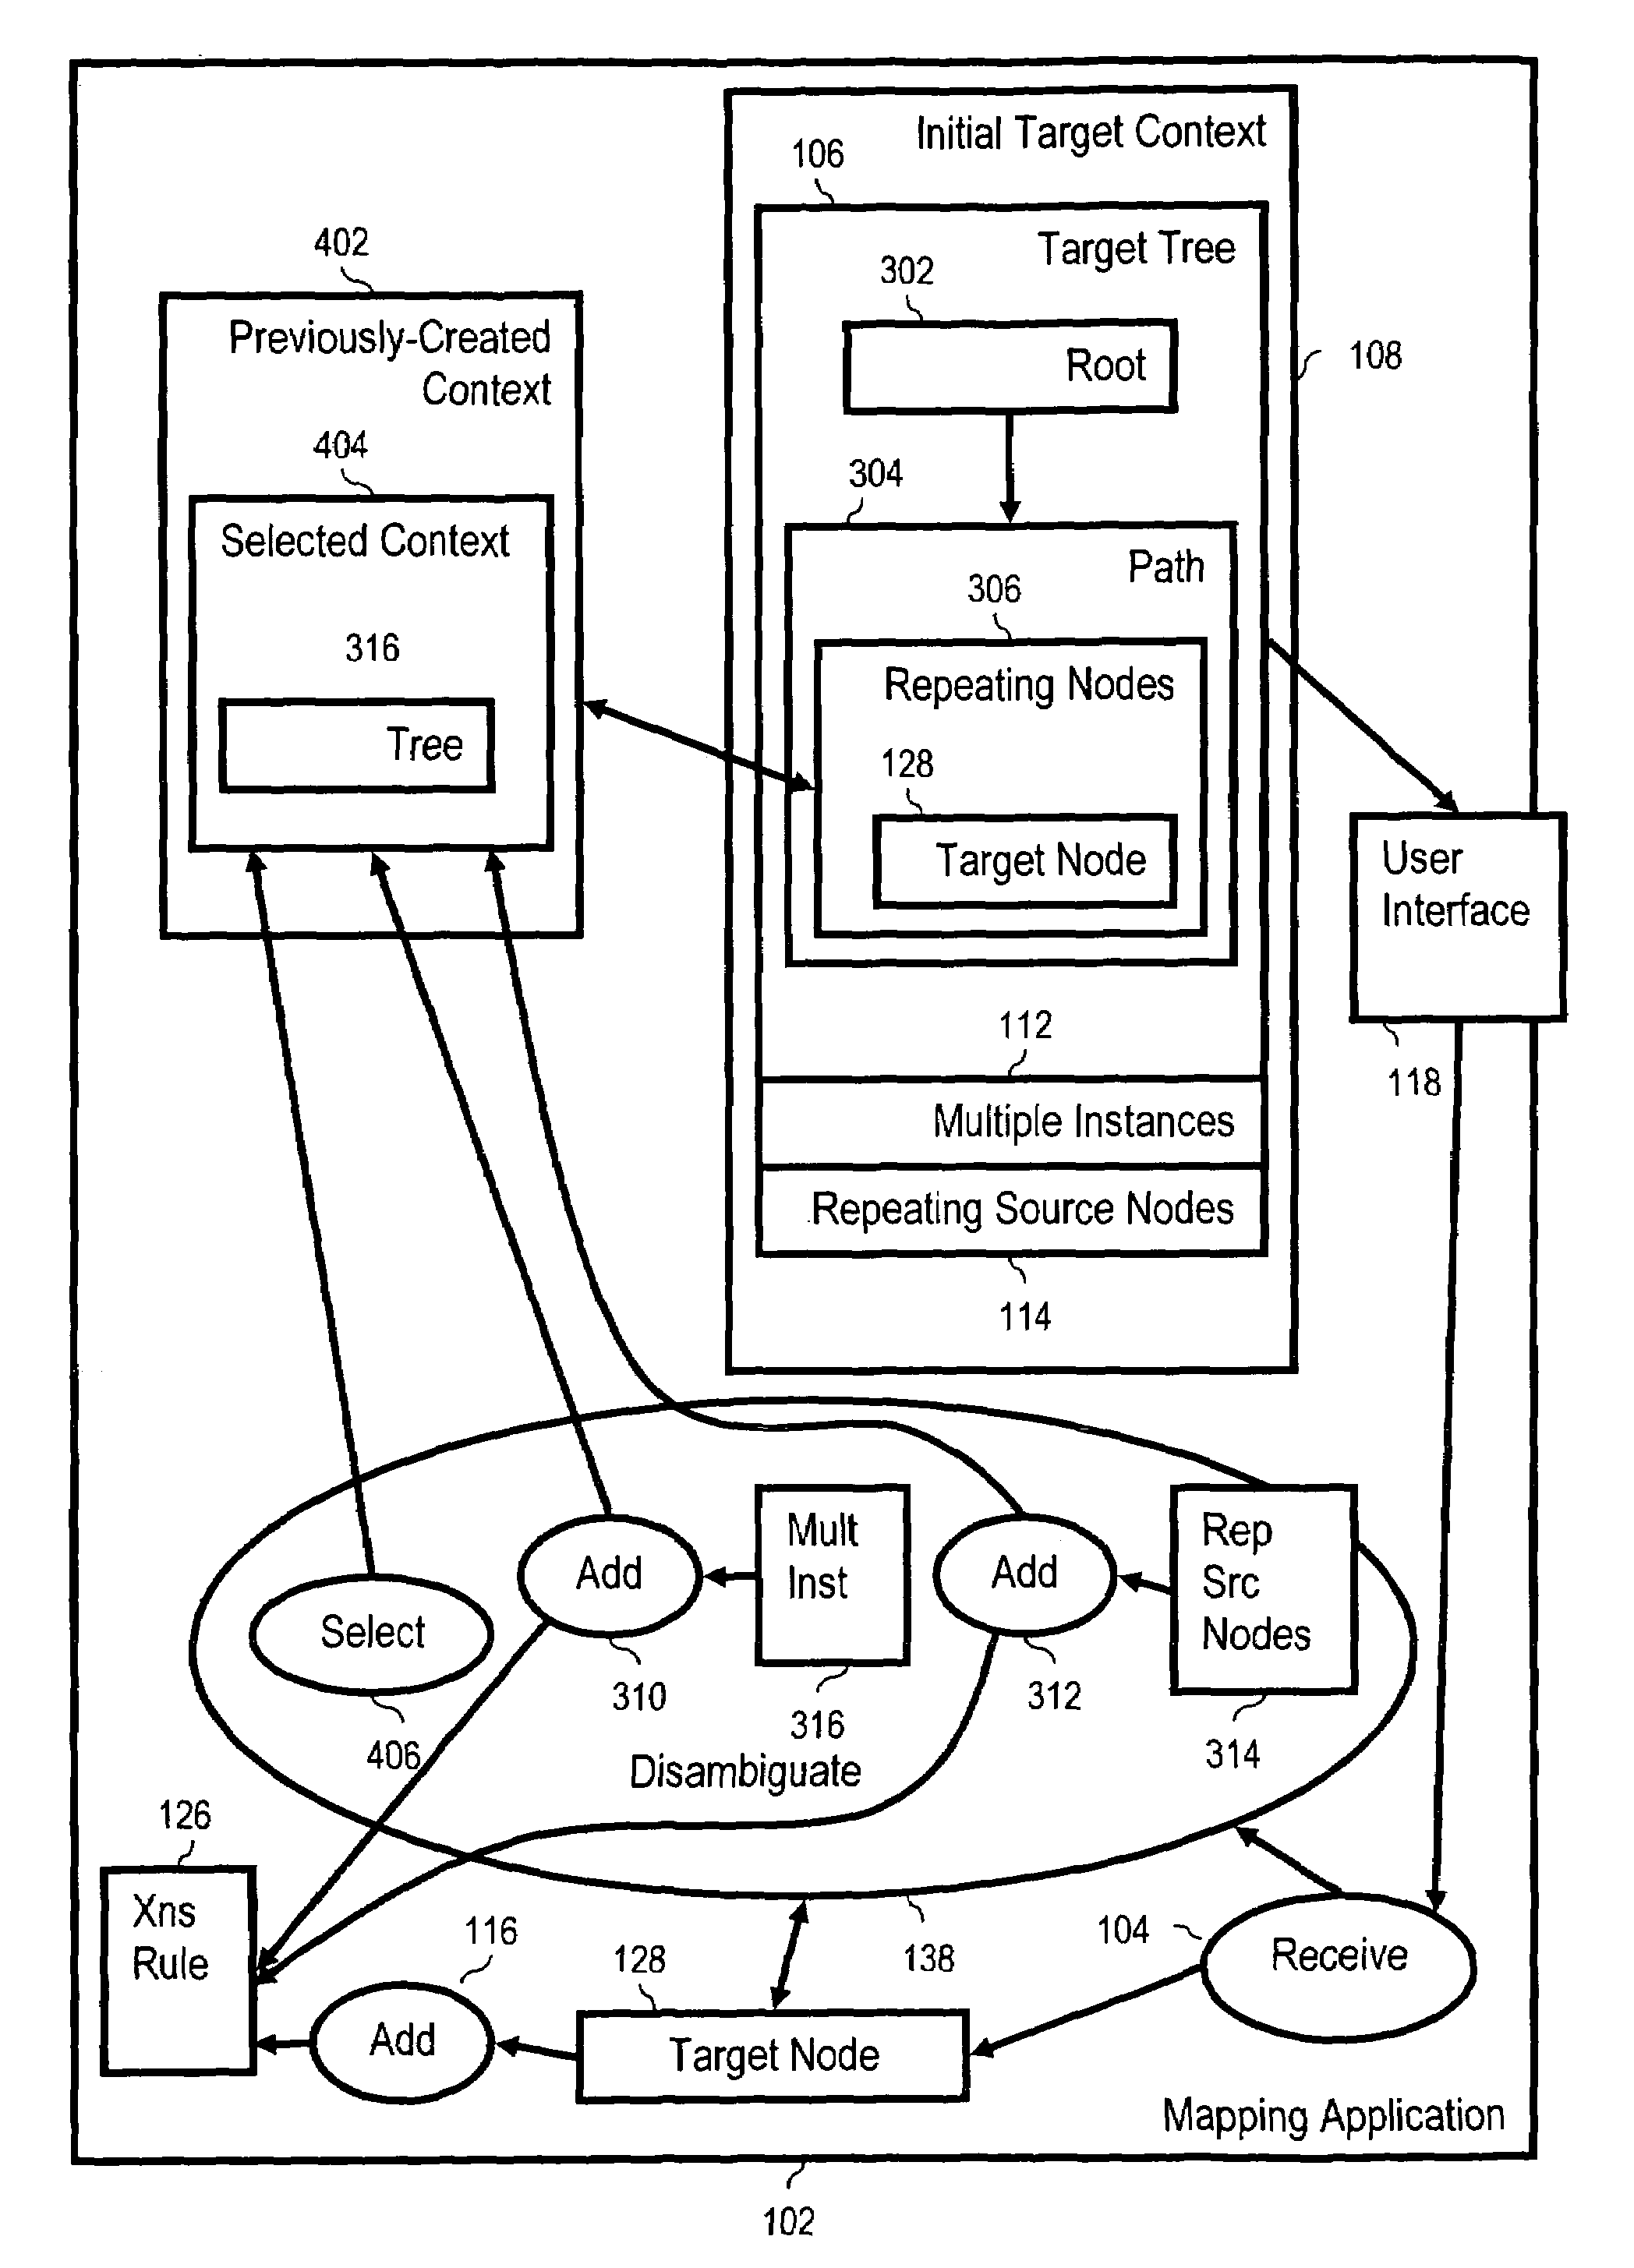 Graphical specification of XML to XML transformation rules